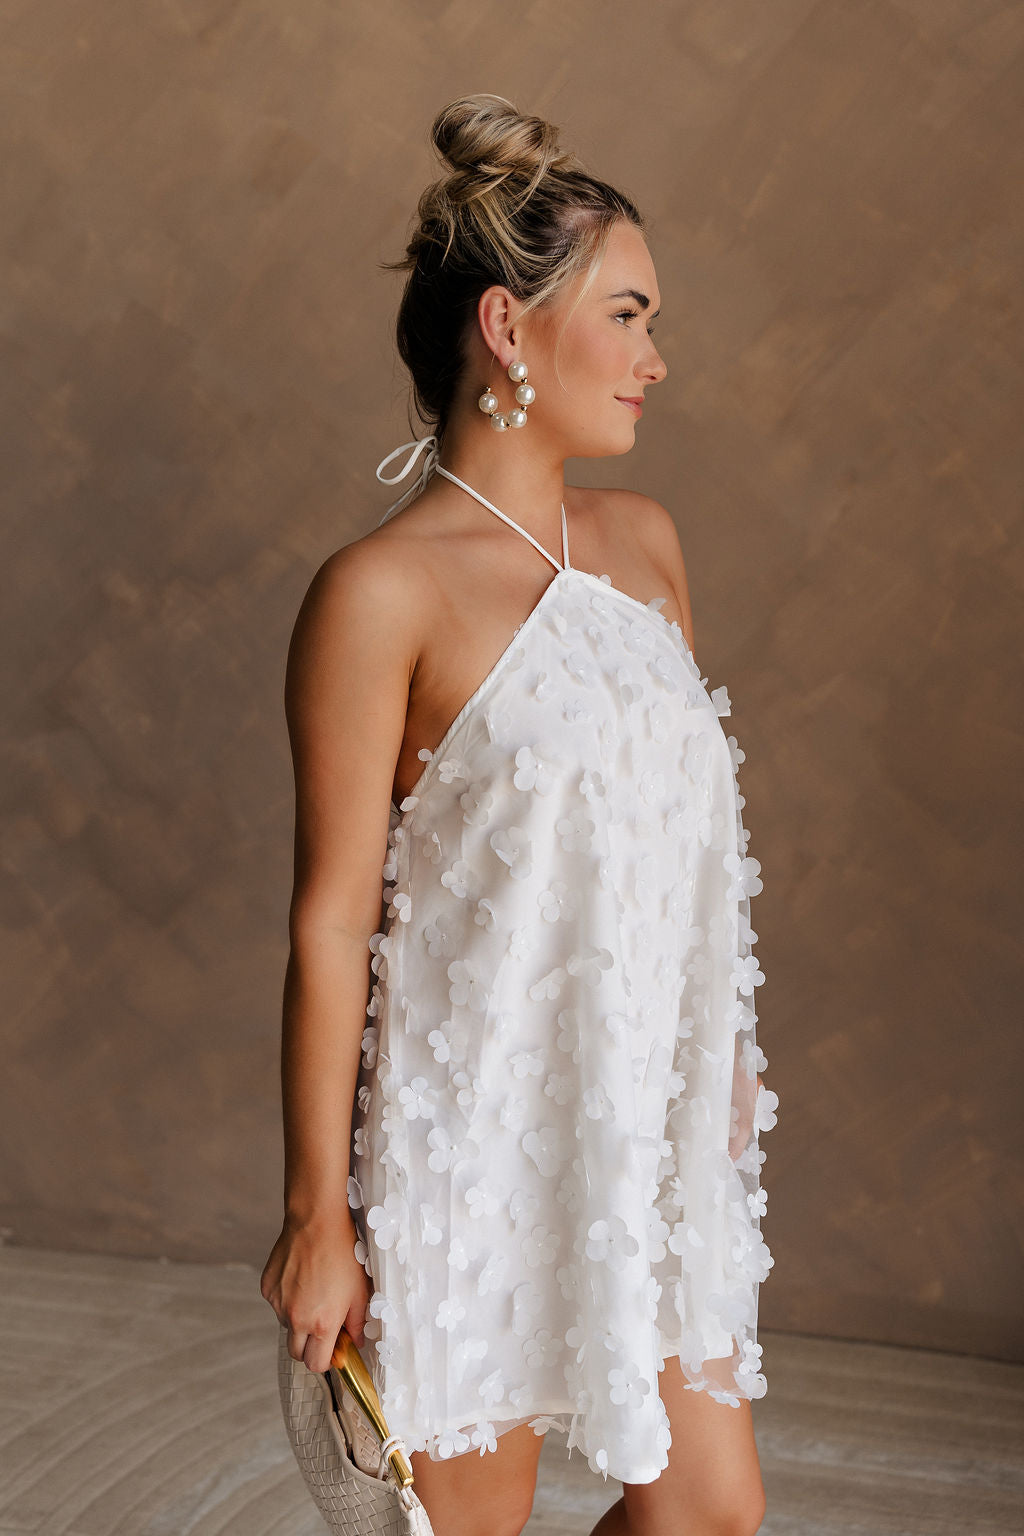 Upper body side view of female model wearing the Meredith White Embellished Floral Dress that has white sheer fabric with 3d floral embellishments, white lining, and a halter neck.